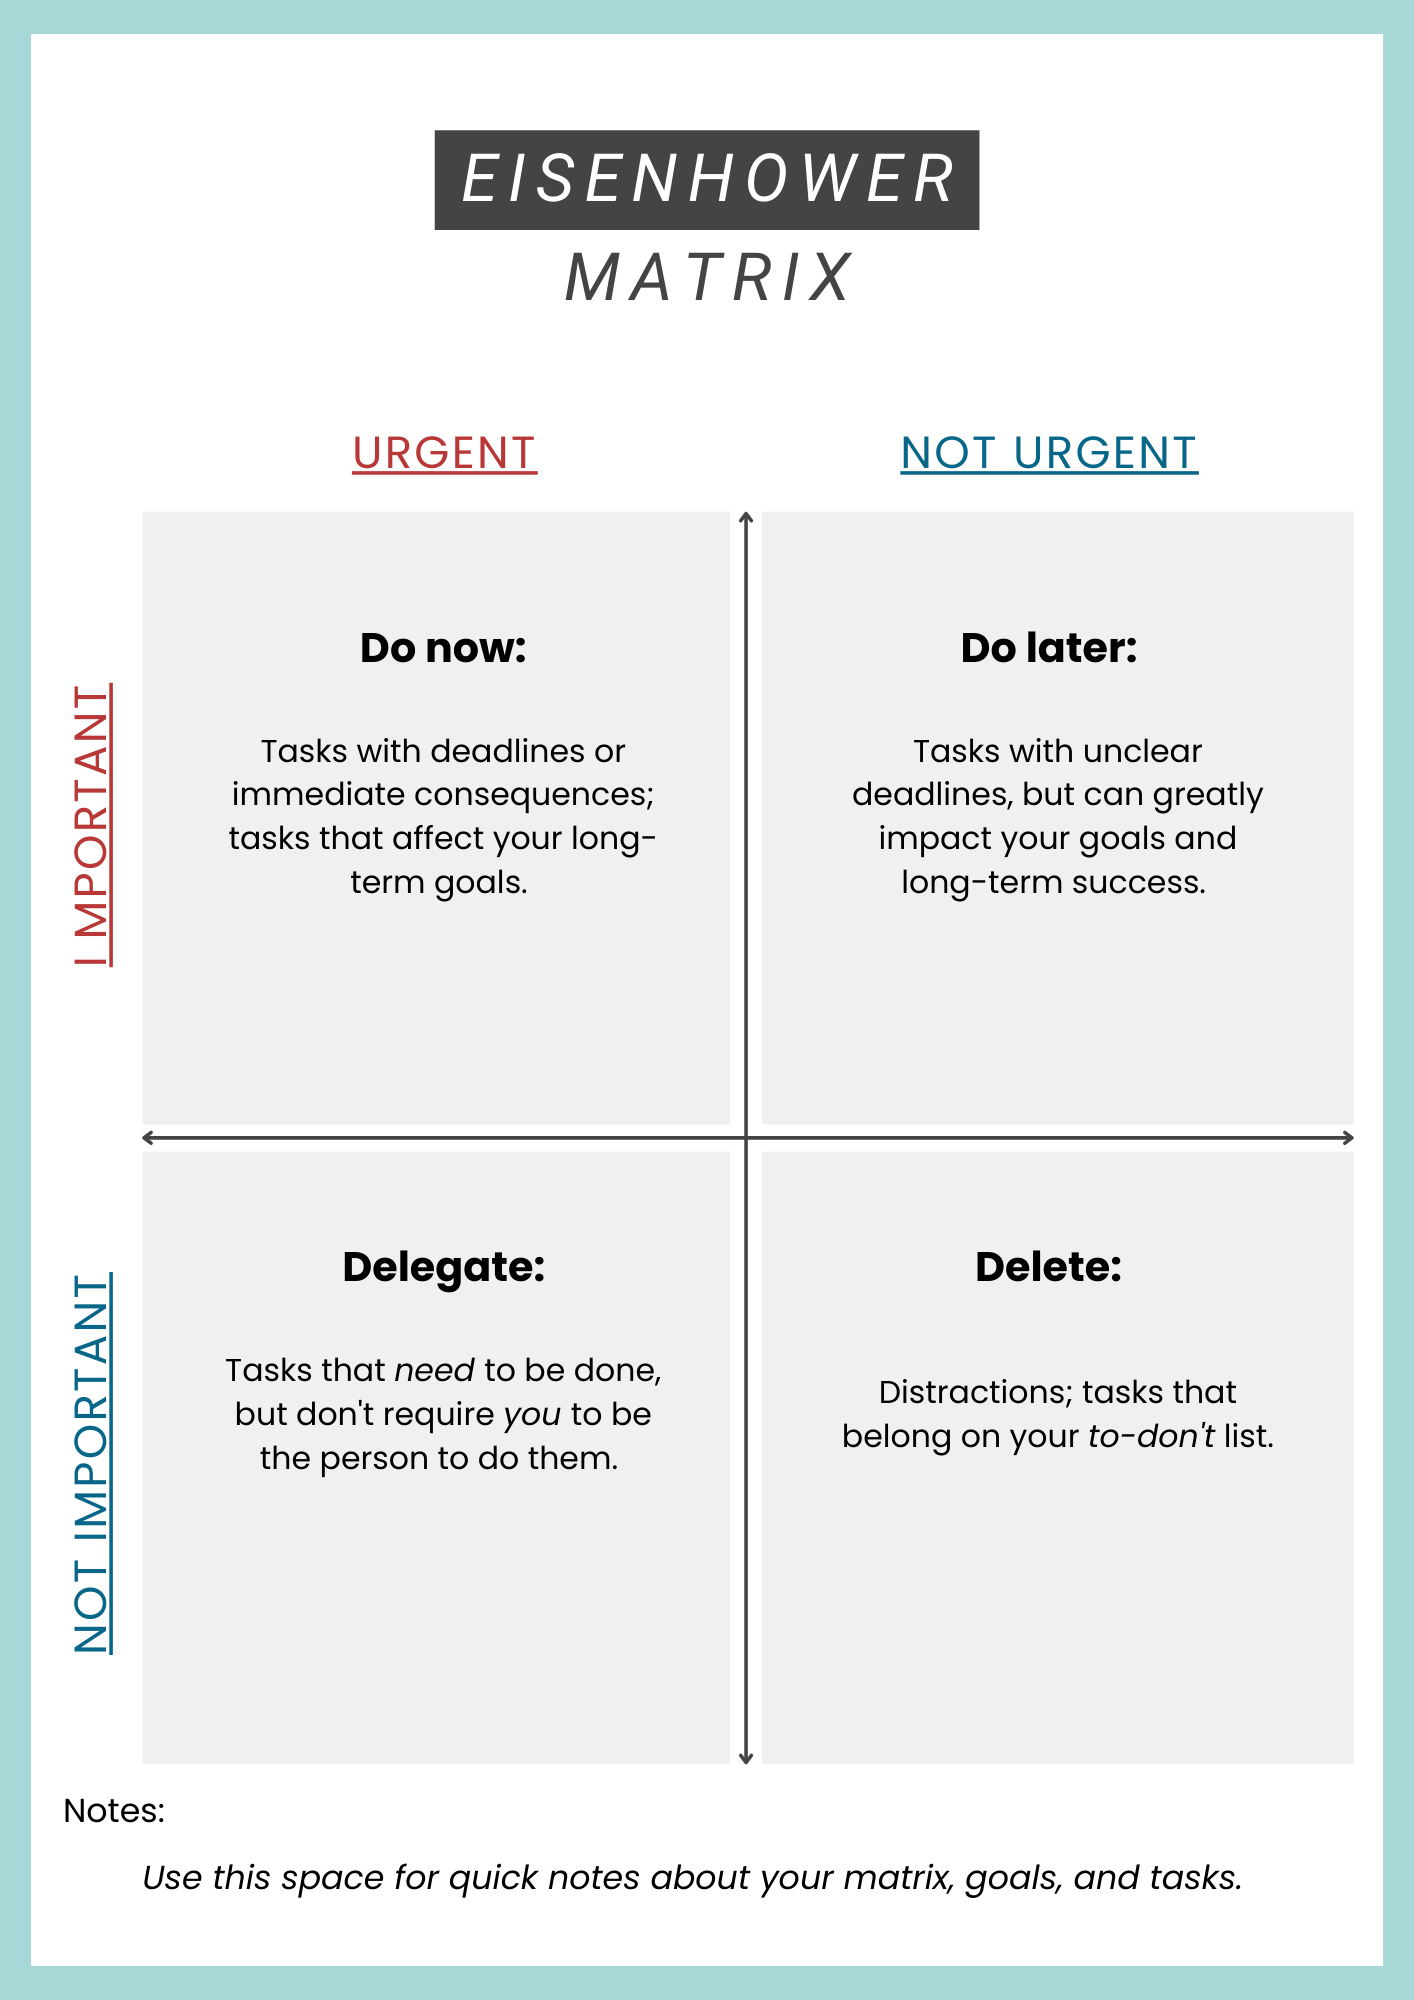 Eisenhower matrix description. top left quadrant: urgent and important. Do now. Tasks with deadlines or immediate consequences; tasks that affect your long-term goals. top right quadrant: important and not urgent. do later. Tasks with unclear deadlines, but can greatly impact your goals and long-term success. bottom left quadrant: not important and urgent. delegate. Tasks that need to be done, but don't require you to be the person to do them. bottom right quadrant. not important not urgent. delete. distractions; tasks that belong on your to don't list.